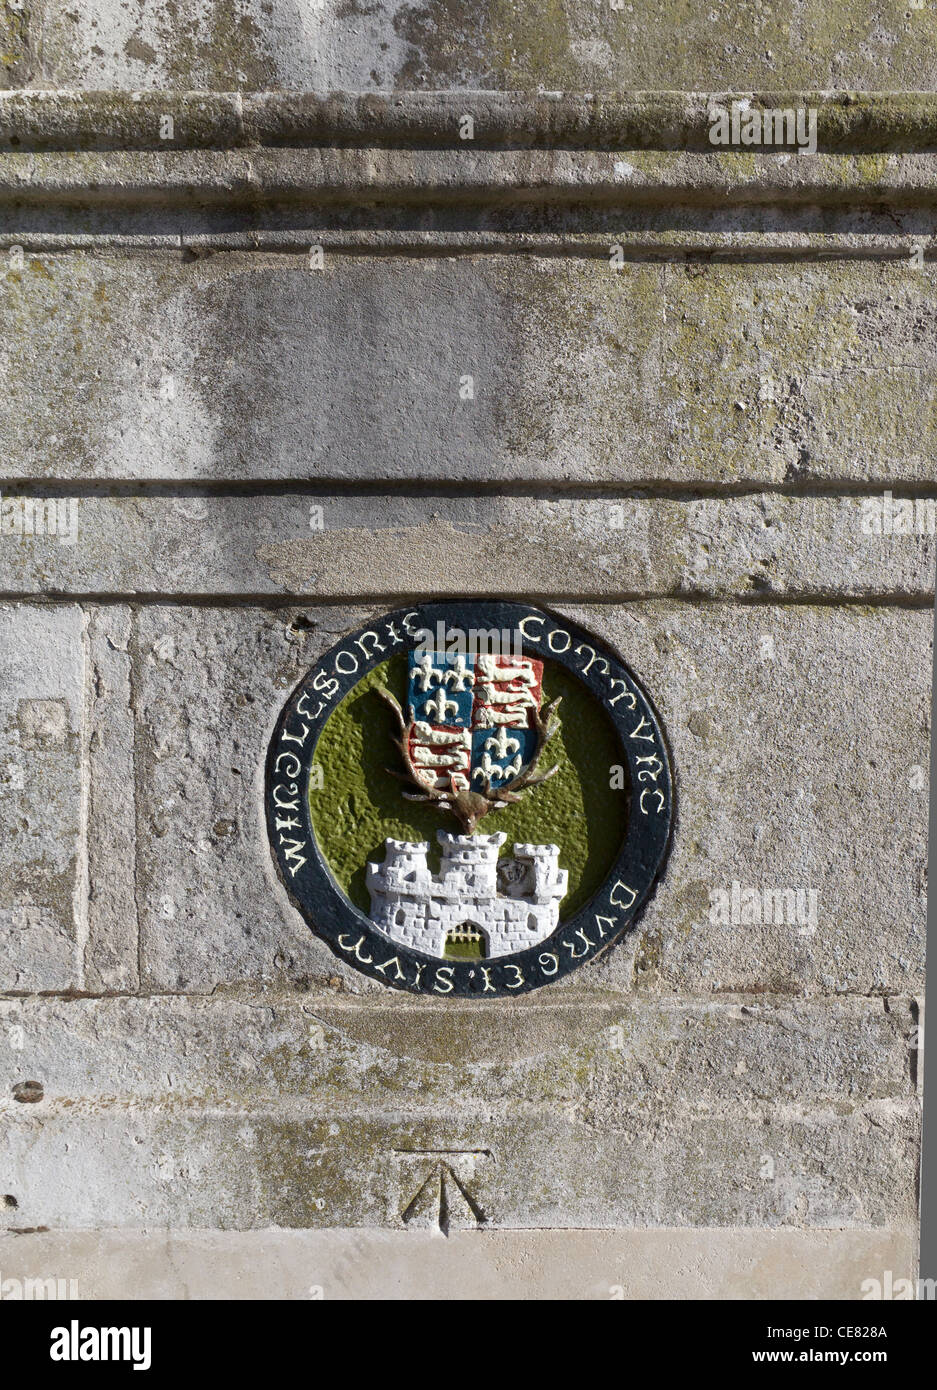 Detail of Windsor Bridge showing a plaque with the Royal Coat of Arms and a depiction of Windsor Castle. Stock Photo